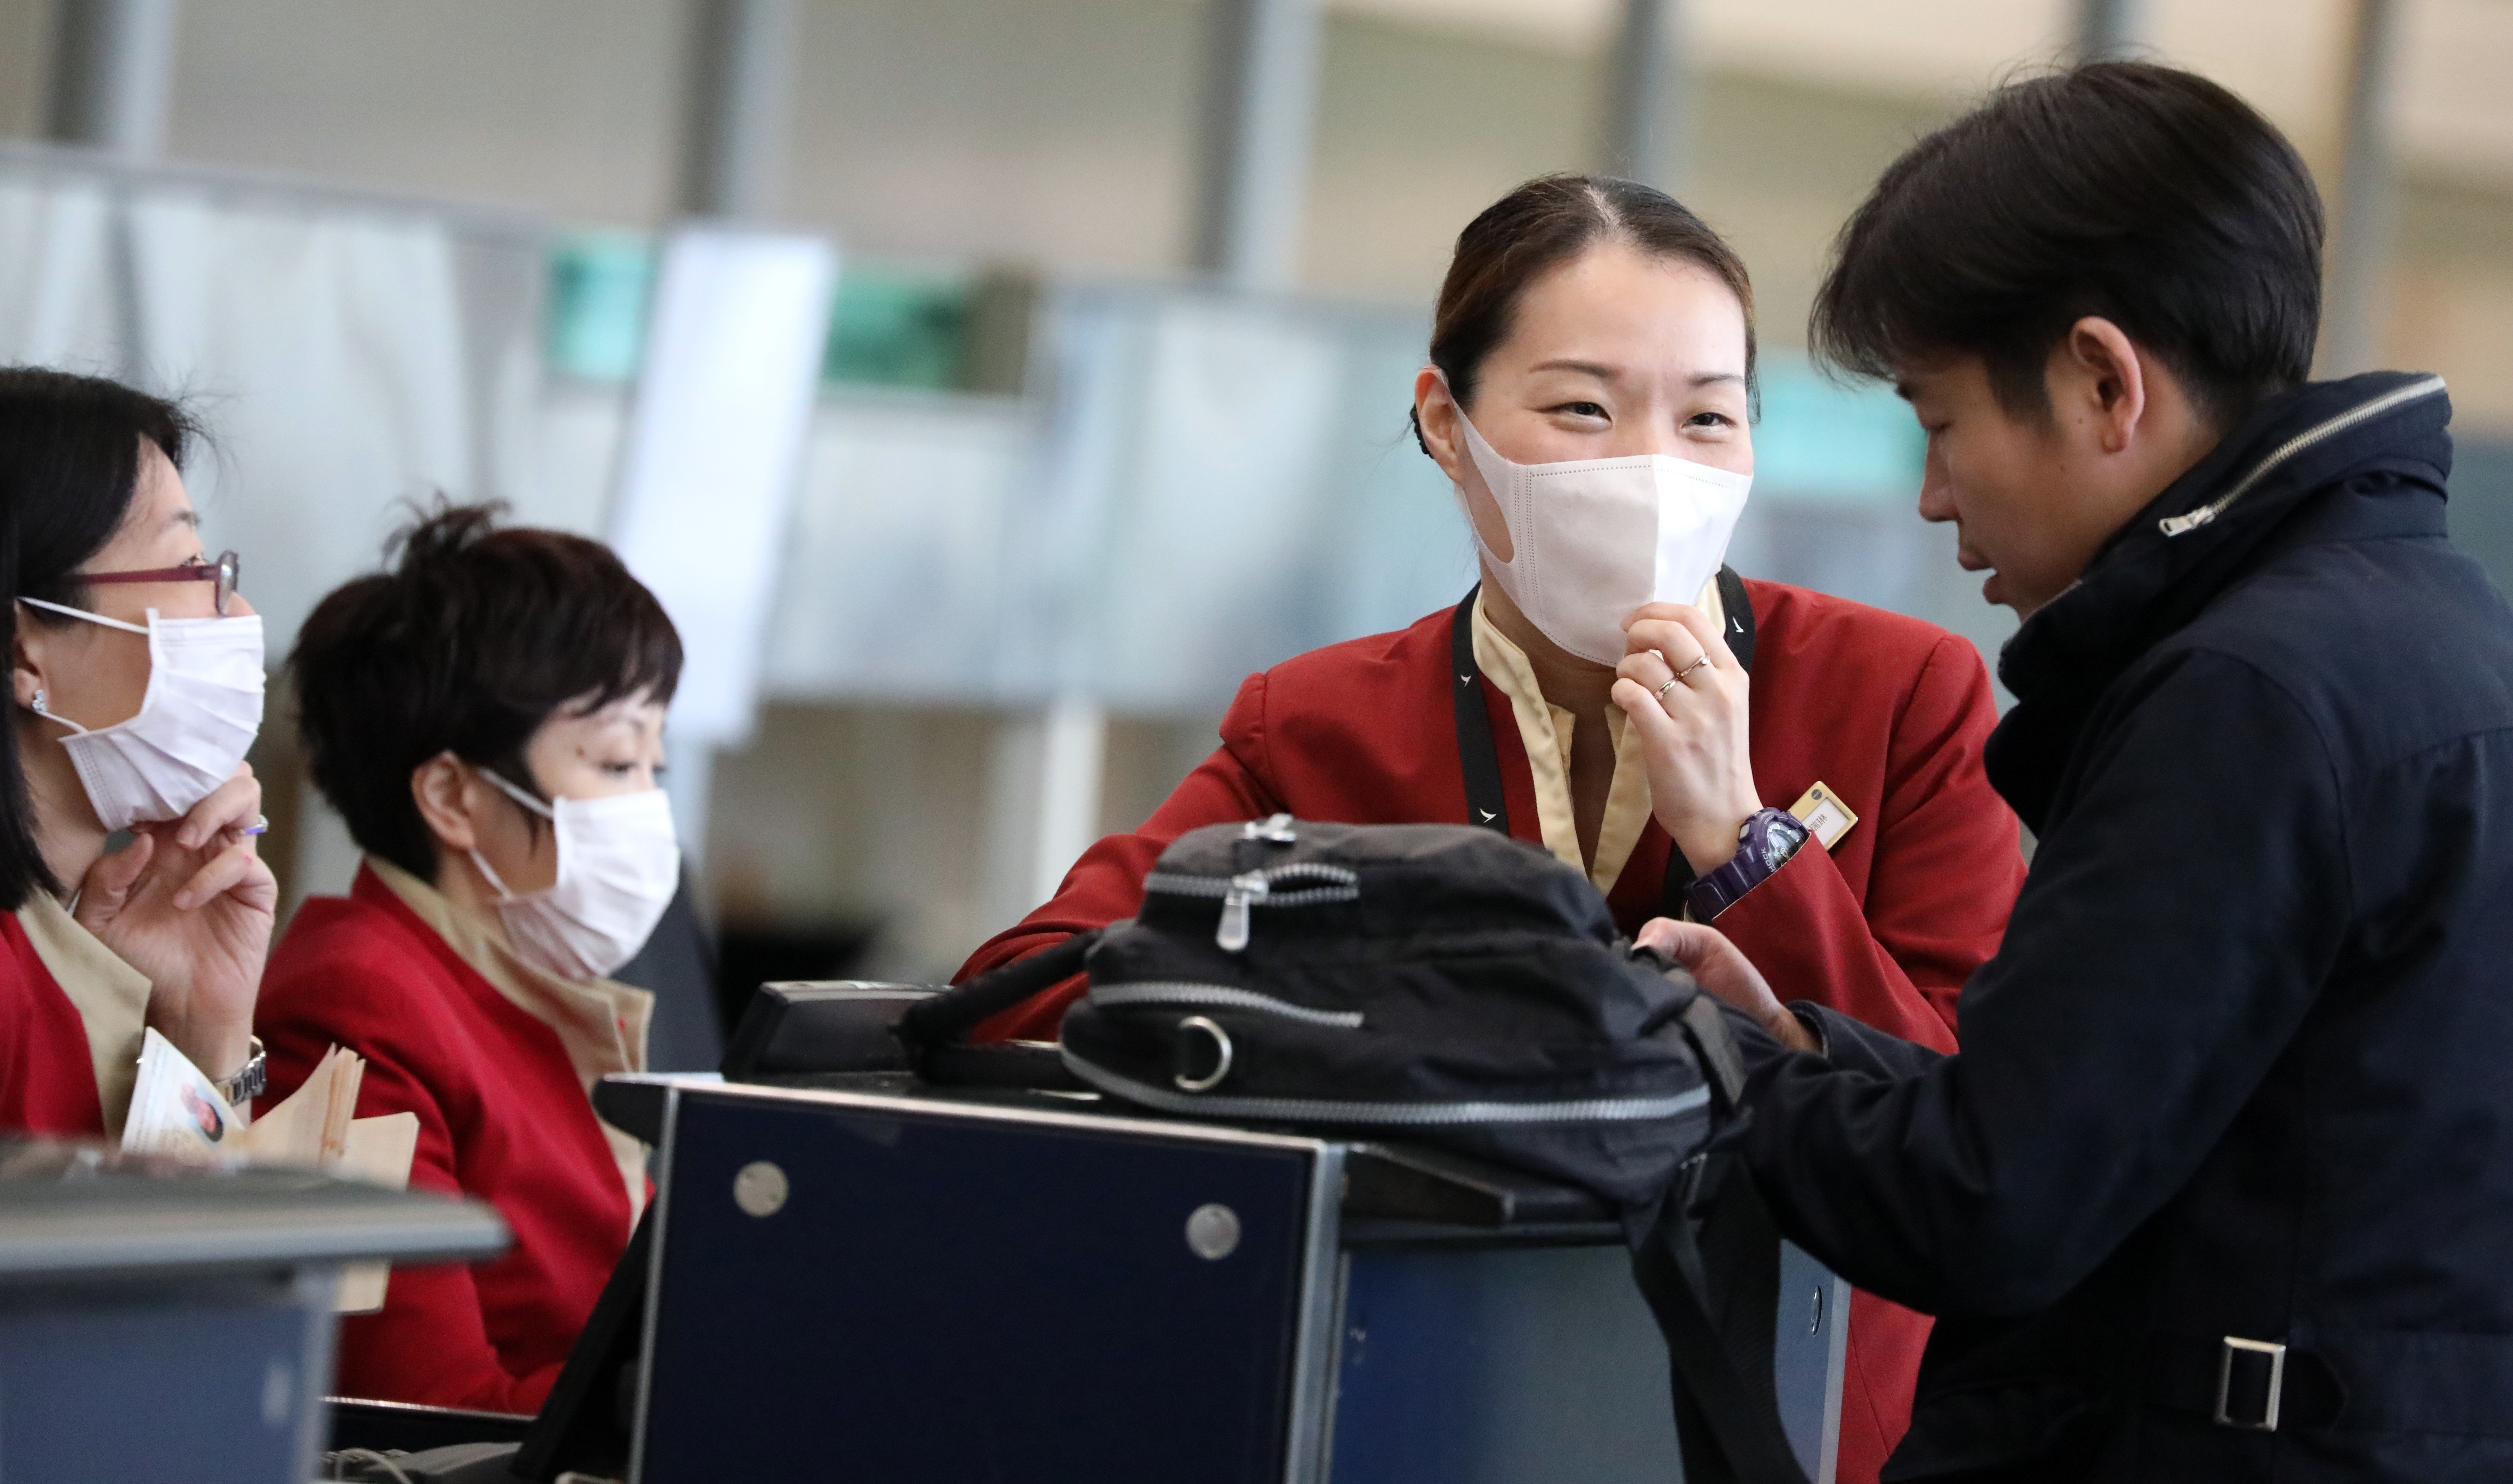 Cathay Pacific ground staff wear face masks at check-in counters at the Hong Kong International Airport on March 24, in the early days of the measles outbreak. Pregnant Cathay flight attendants a few days later threatened to go on mass sick leave unless the airline improved its safeguards. Photo: Nora Tam